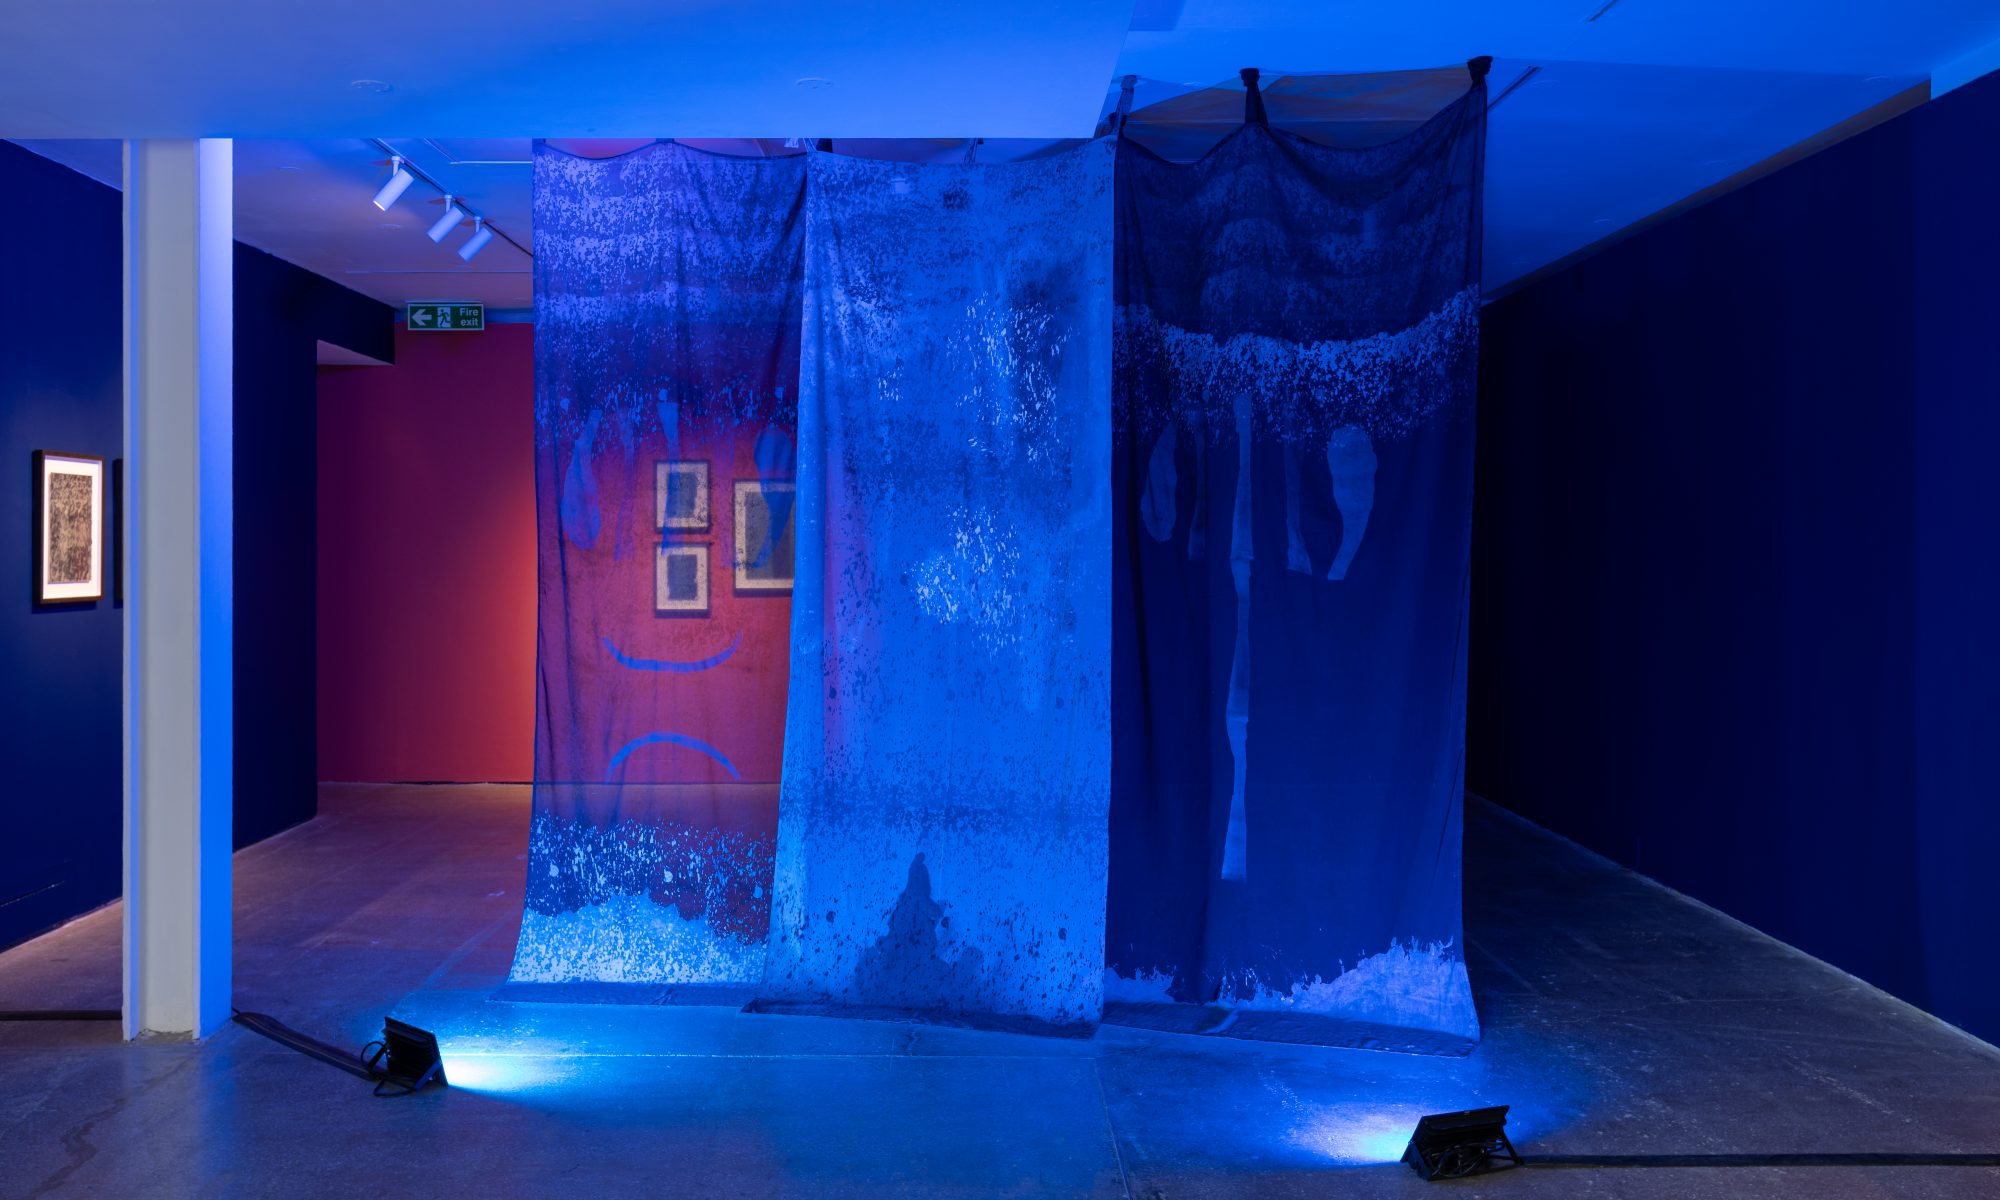 Photograph showing Jesica El Mal's work installed at Castlefield Gallery. Three transulsent blue banners, lit by two blue lights, hang floor to celing infront of a red wall.